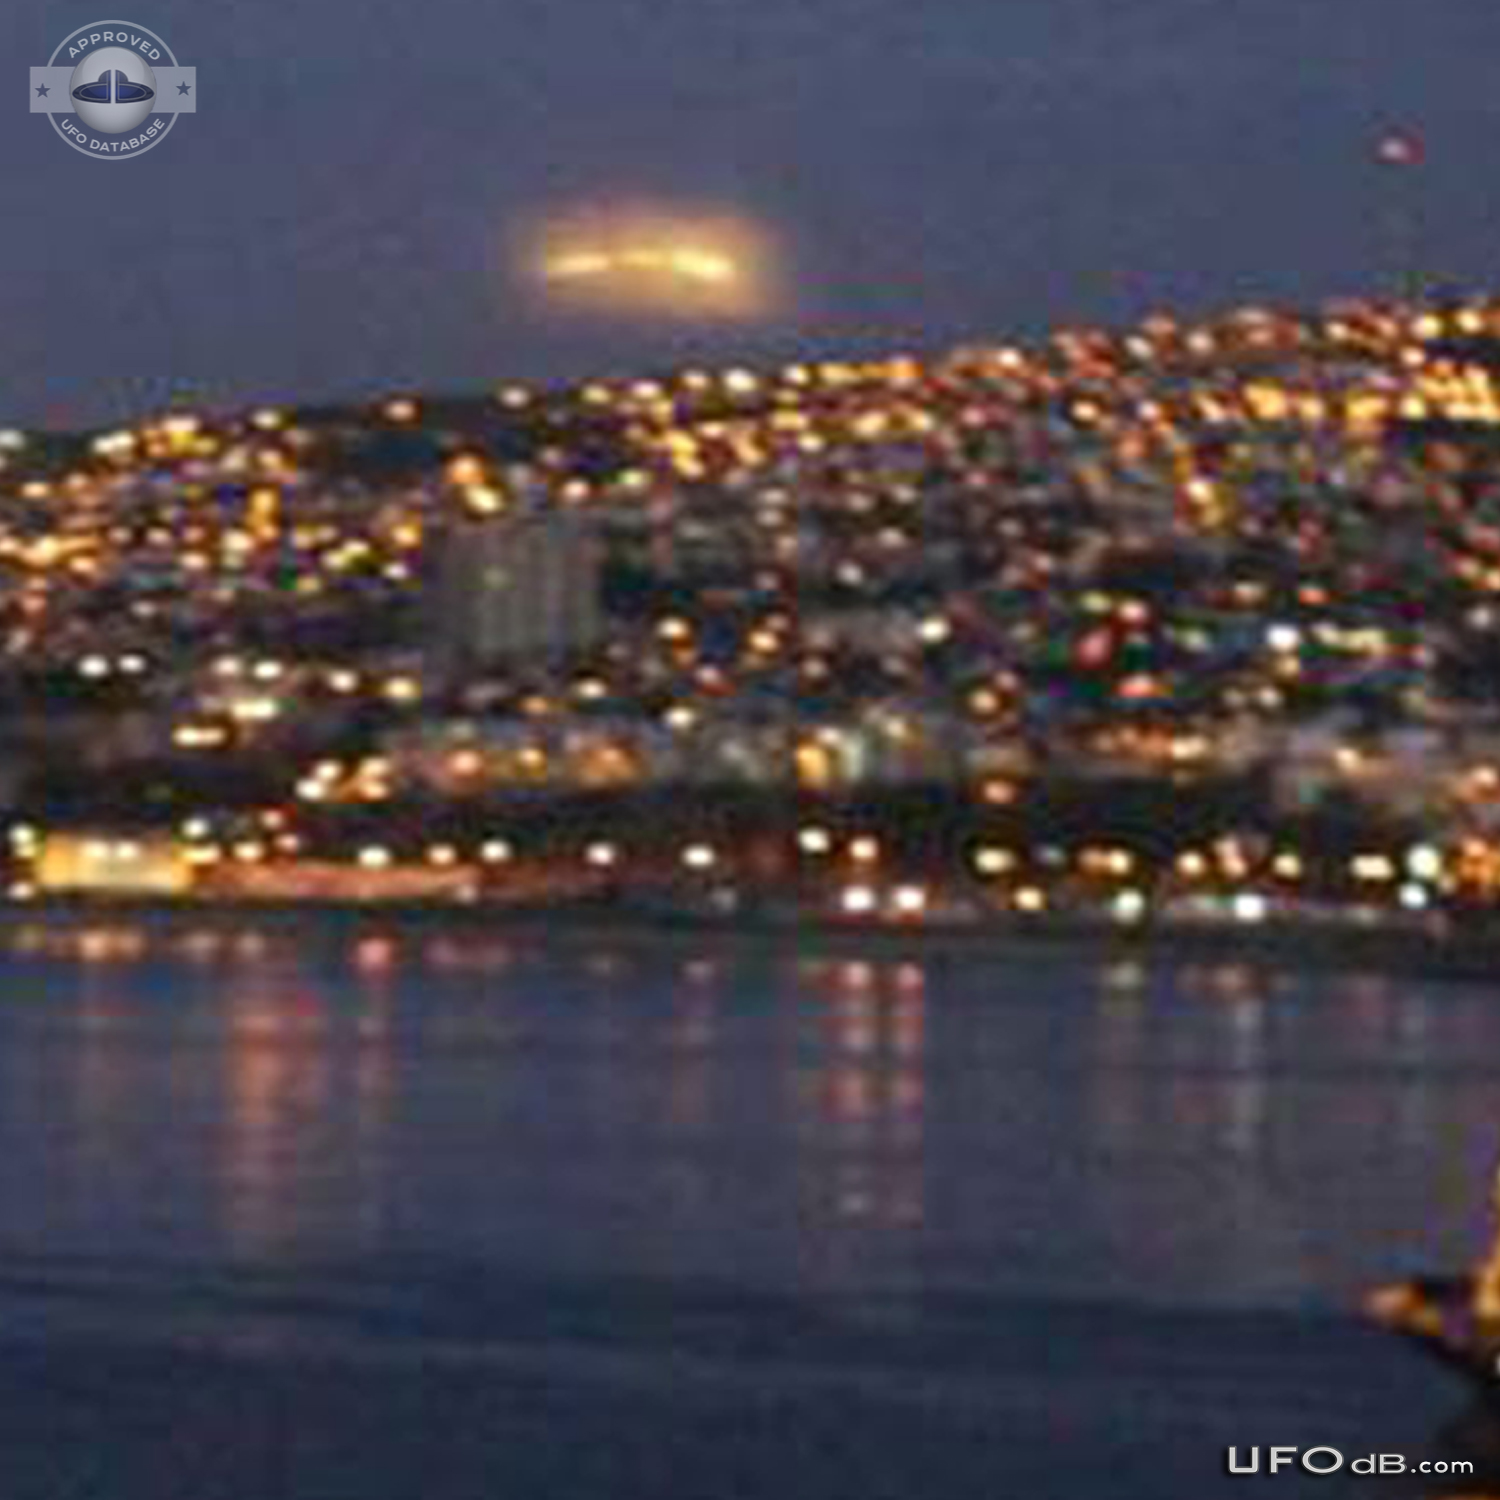 UFO saucer caught on picture by journalist in Mexico - October 2014 UFO Picture #639-4